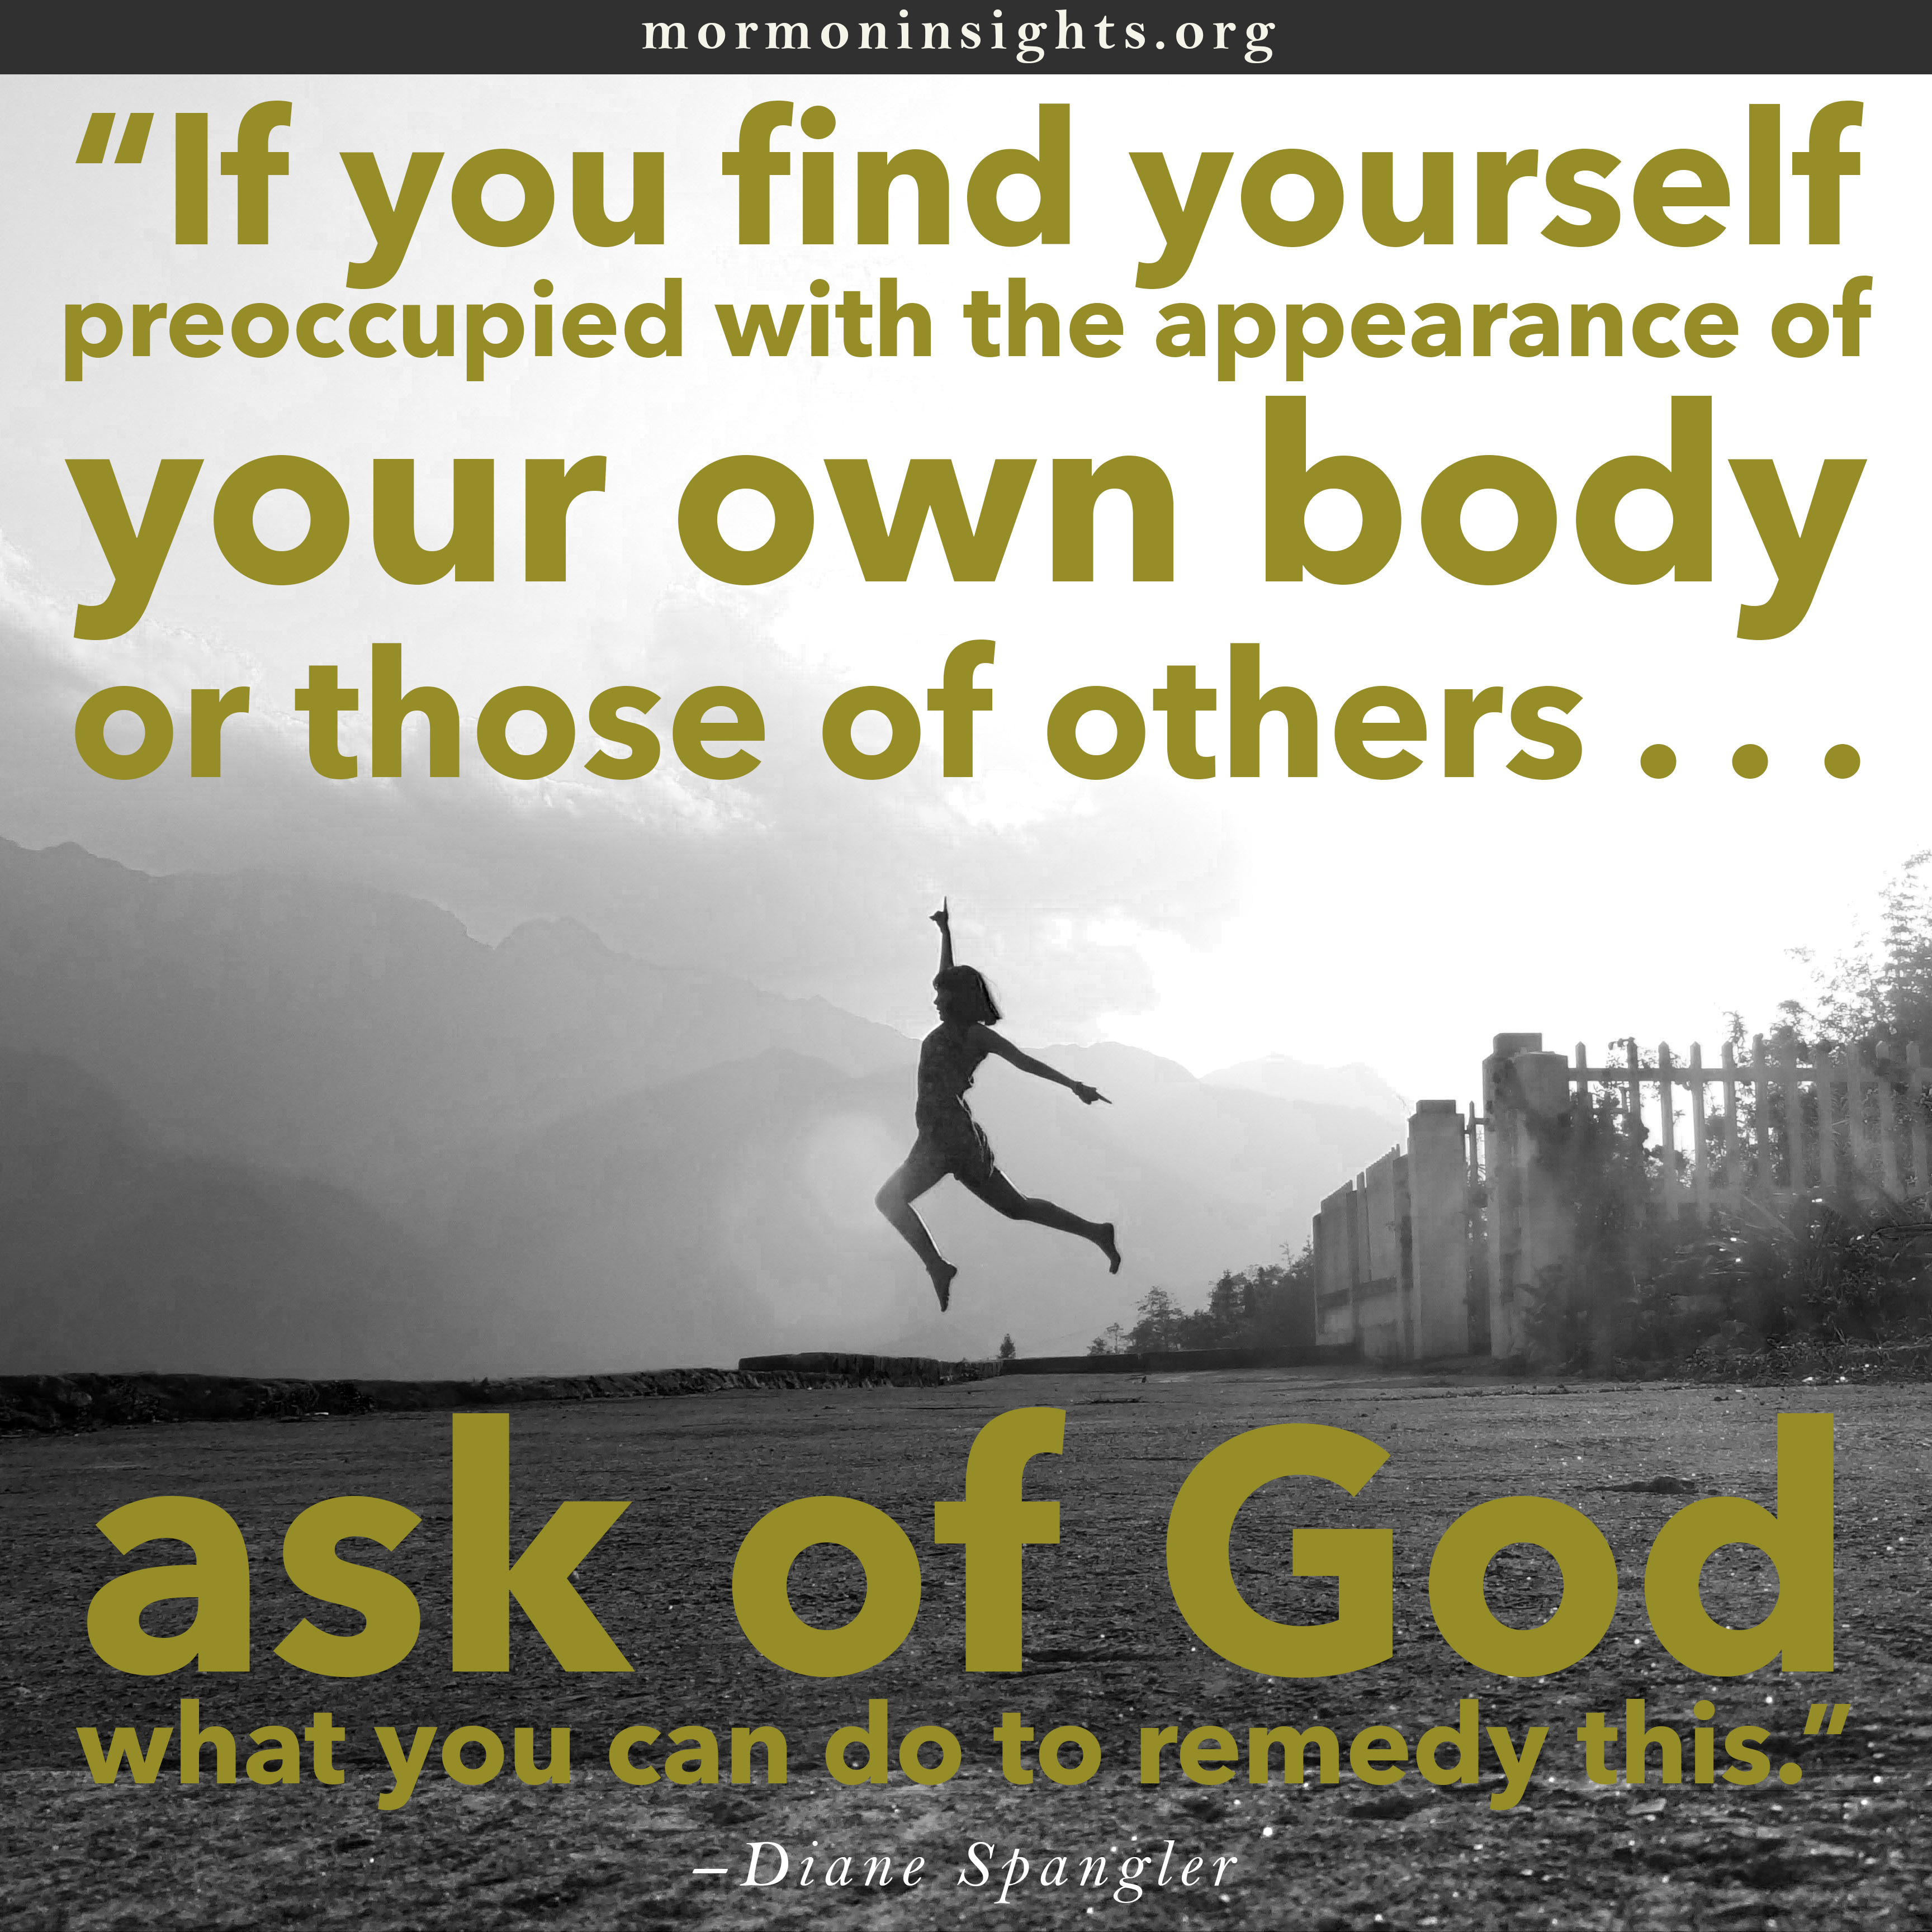 "If you find yourself preoccupied with the appearance of your own body or those of others . . . ask of God what you can do to remedy this." - Diane Spangler